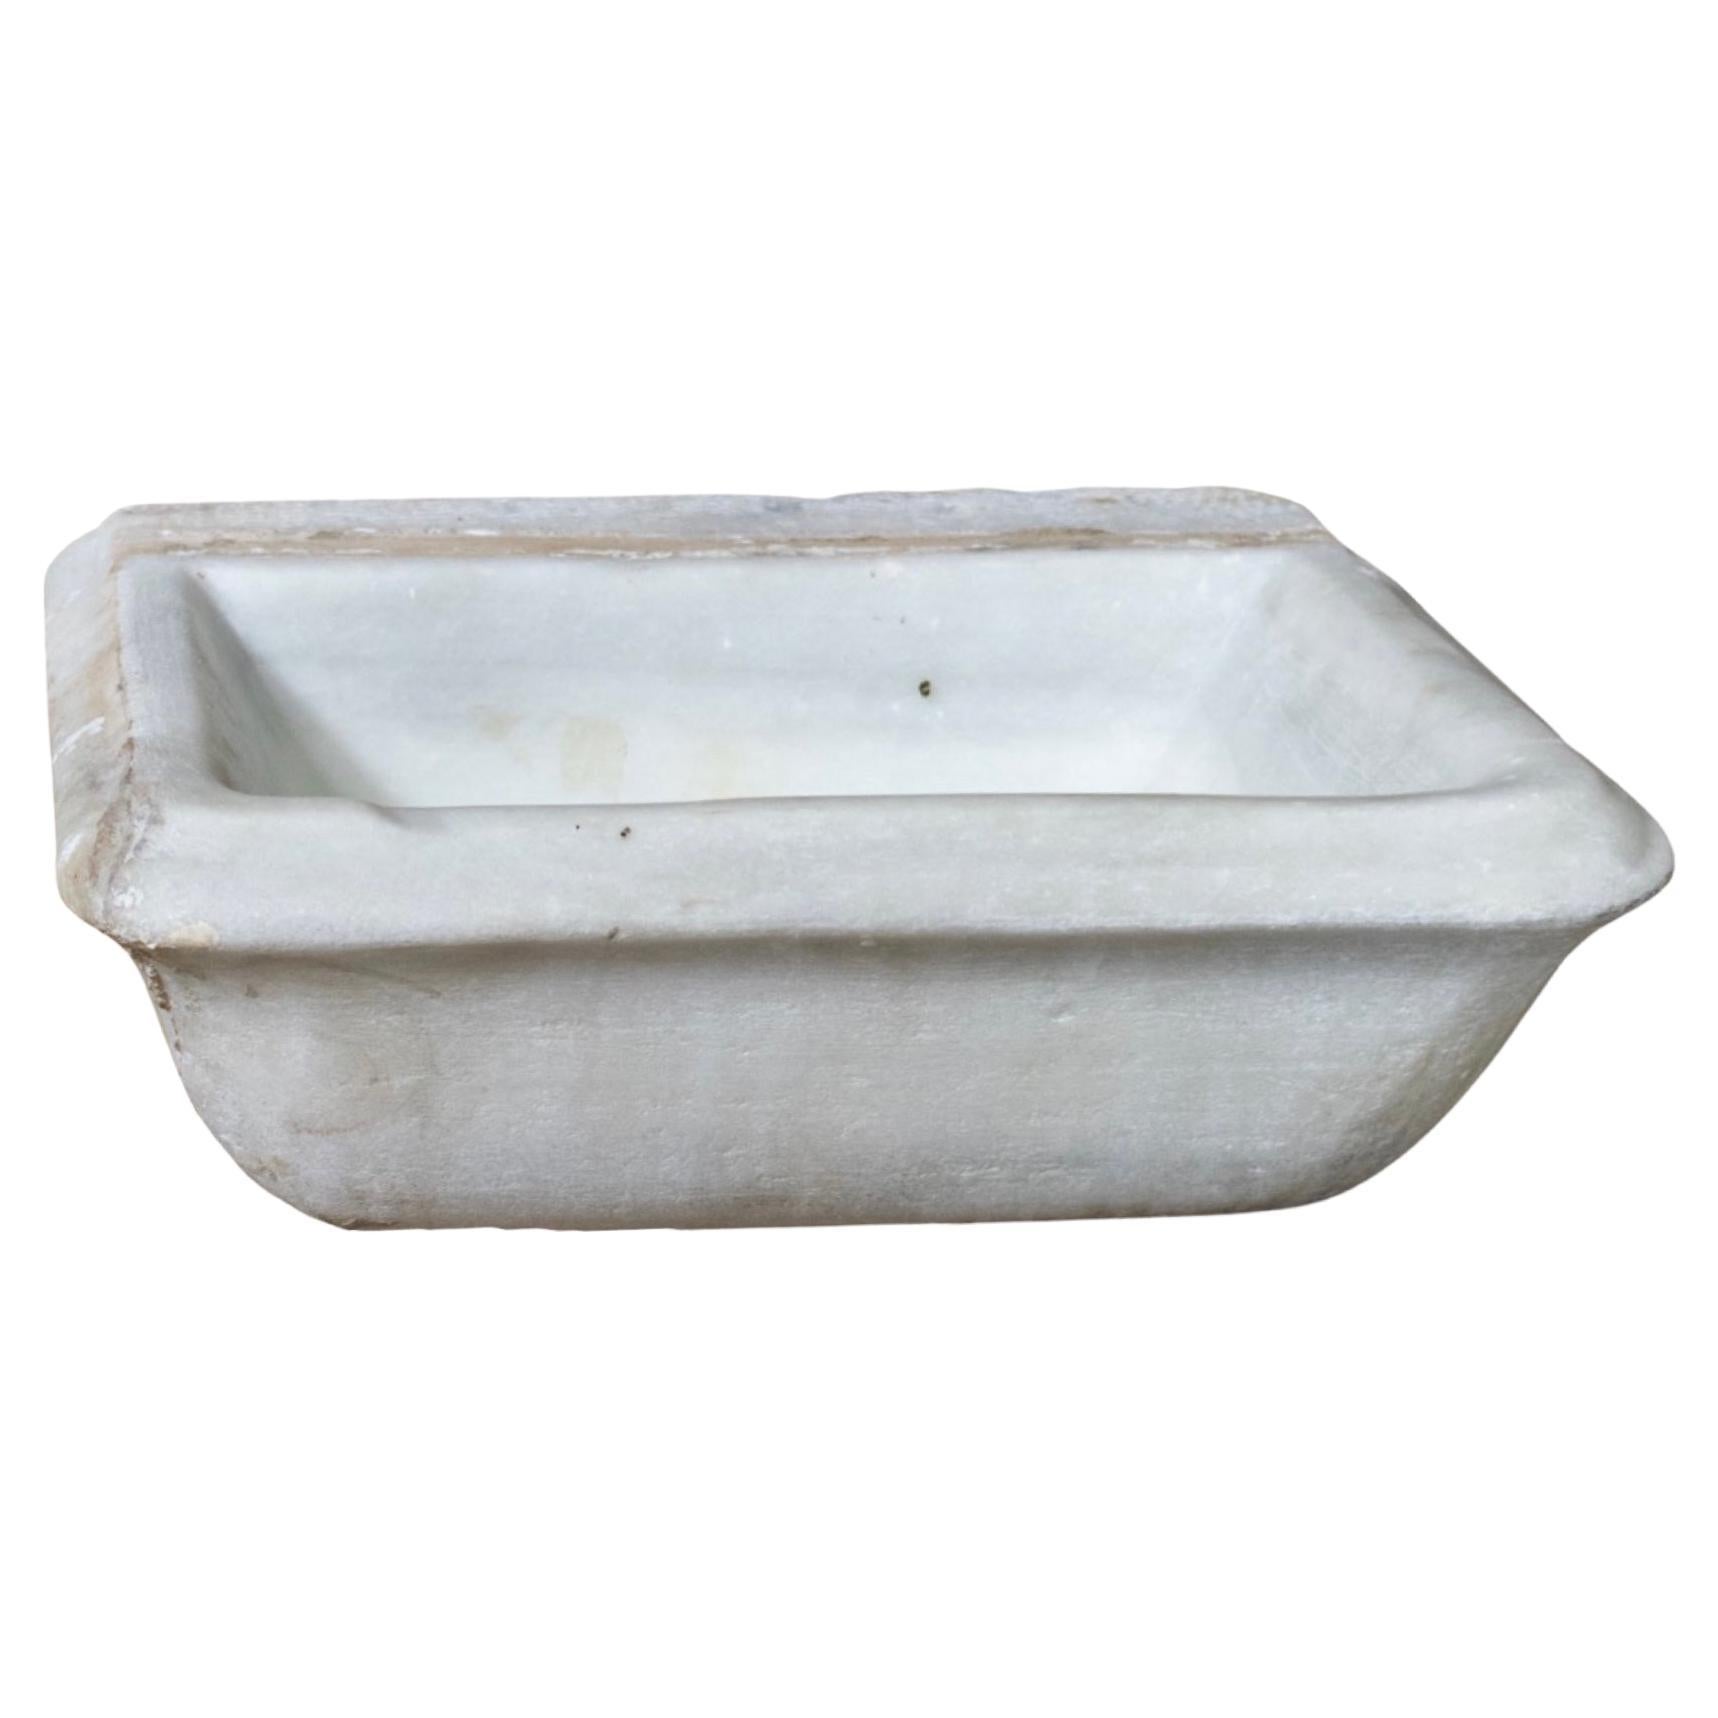 Small sink made out of white Marble stone. Originates from France. Circa, 19th c.